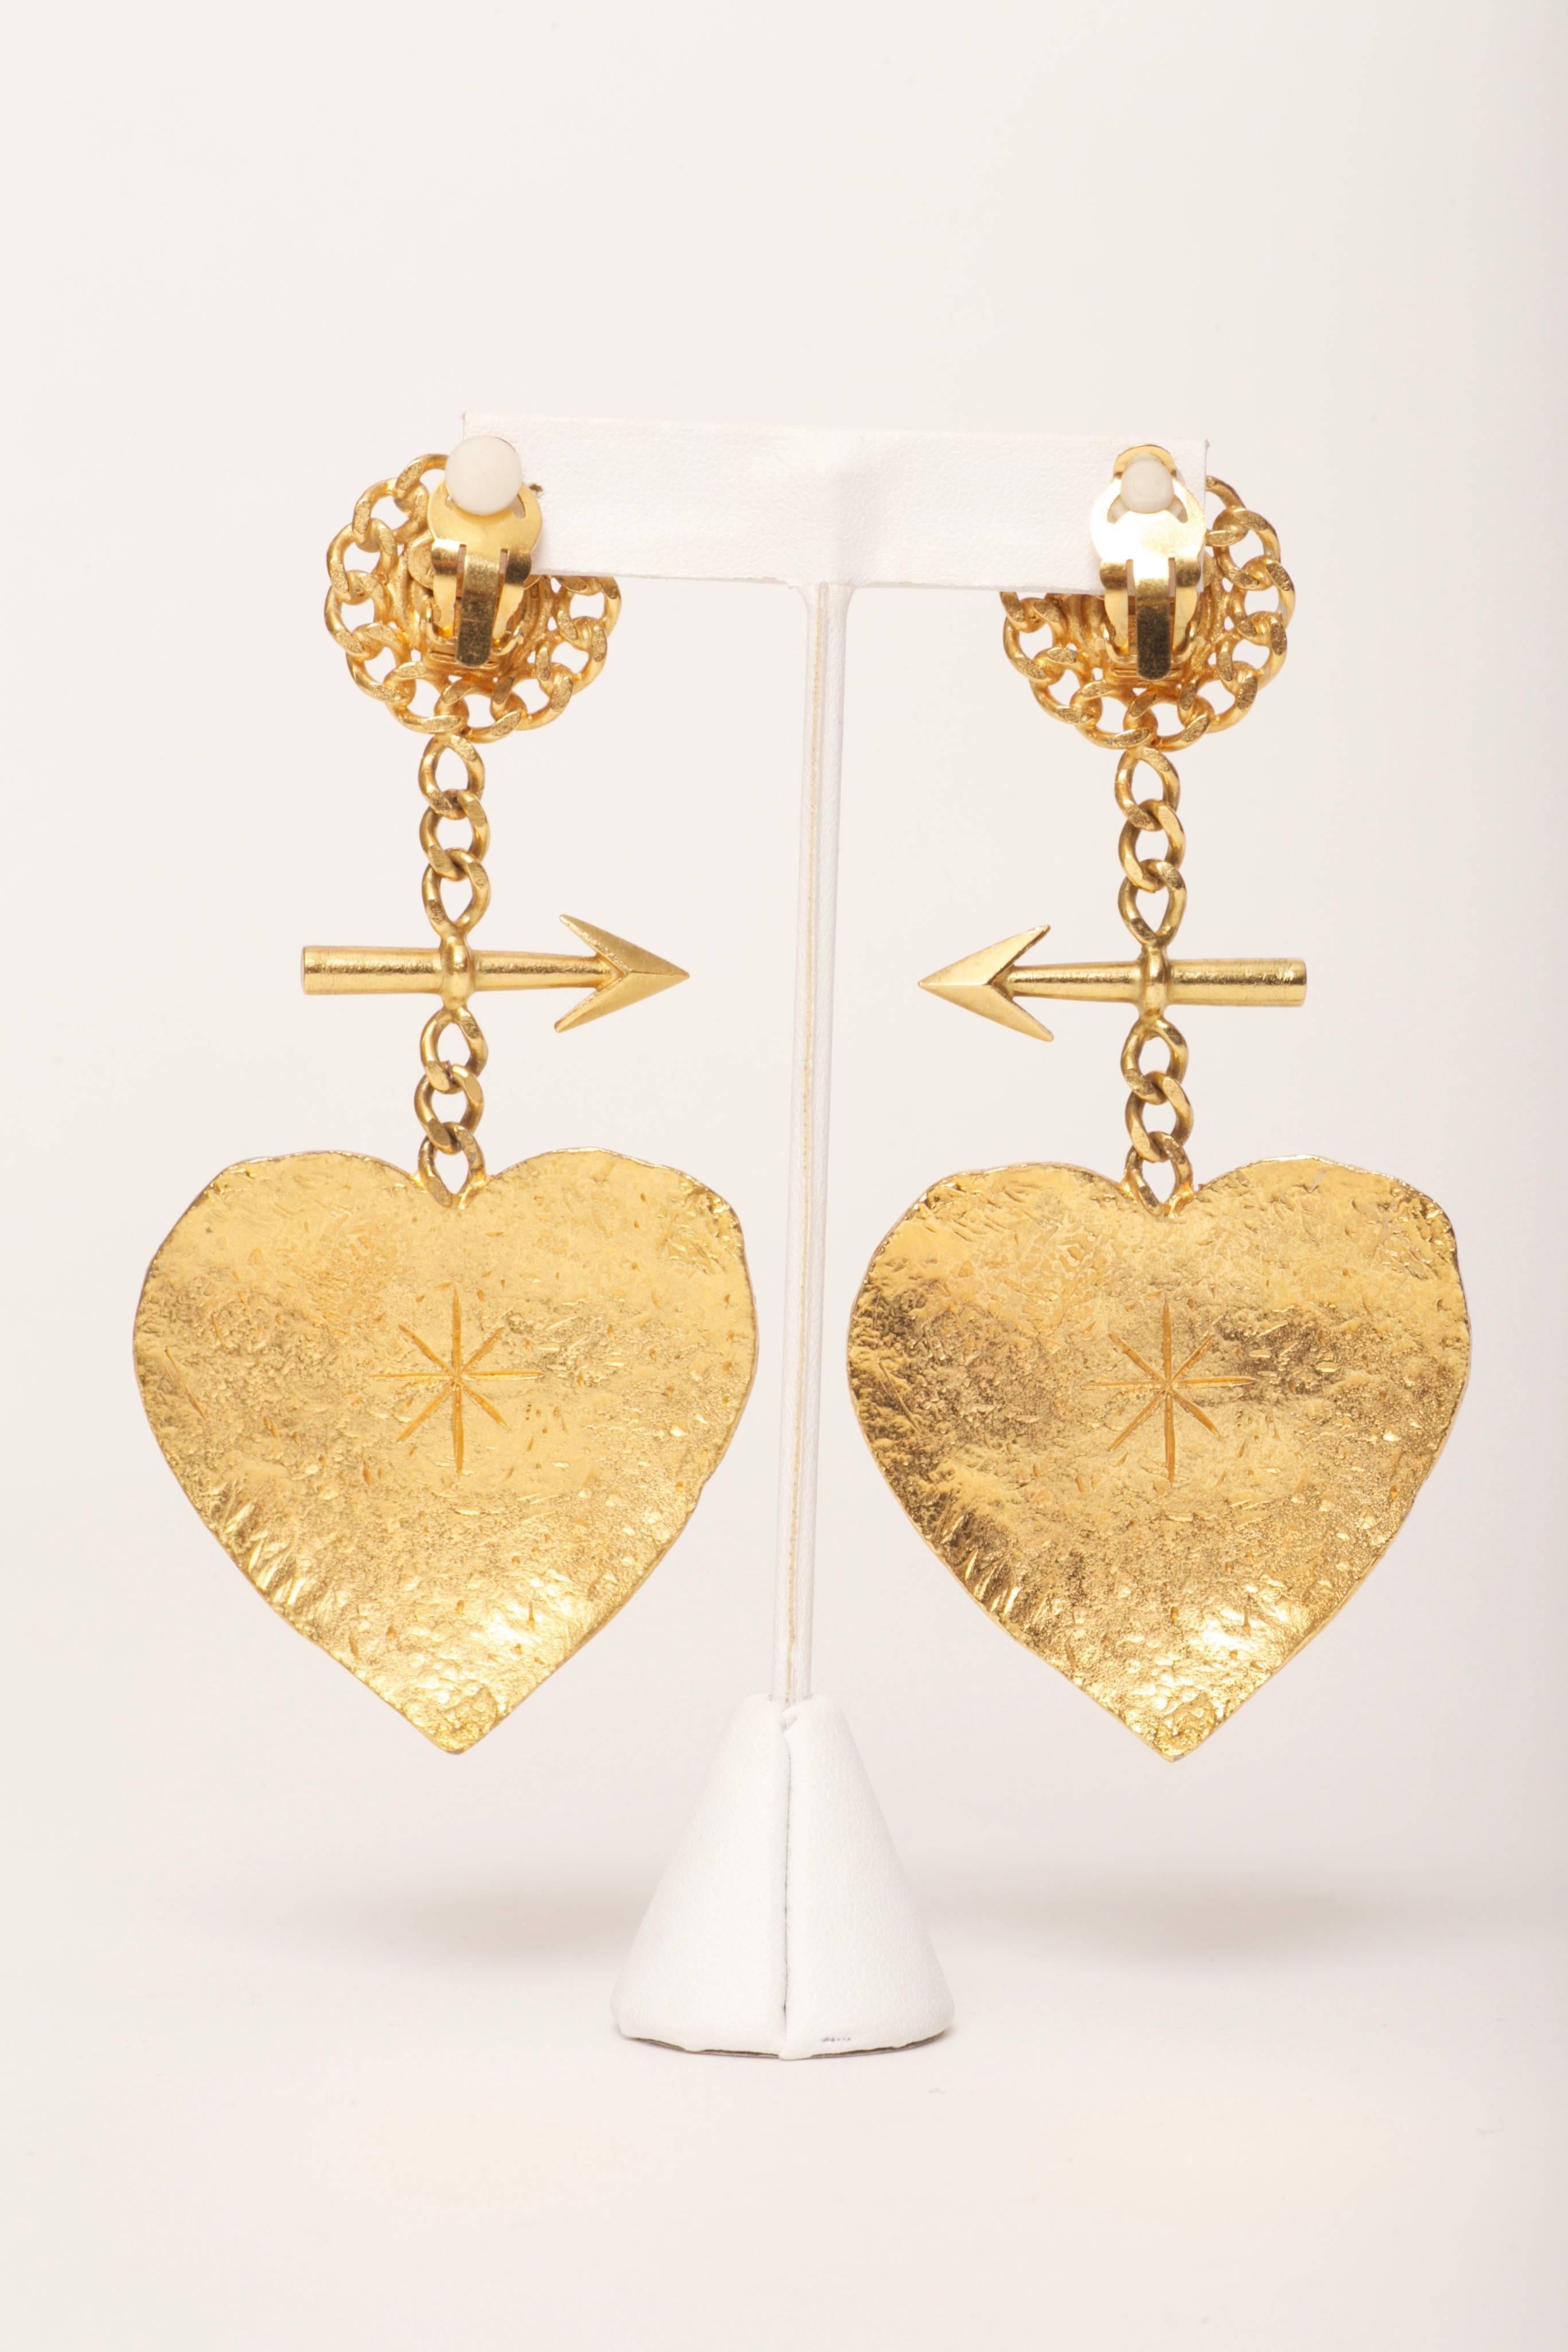 XXL Chanel, Cambon, Paris Graffiti Heart & Arrow Earrings Vintage 1993

Rare Heart and Arrow gold tone textured metal Chanel clip on earrings. Chain around button top and chain drop with arrow. Large heart drop that has Chanel, Cambon Paris